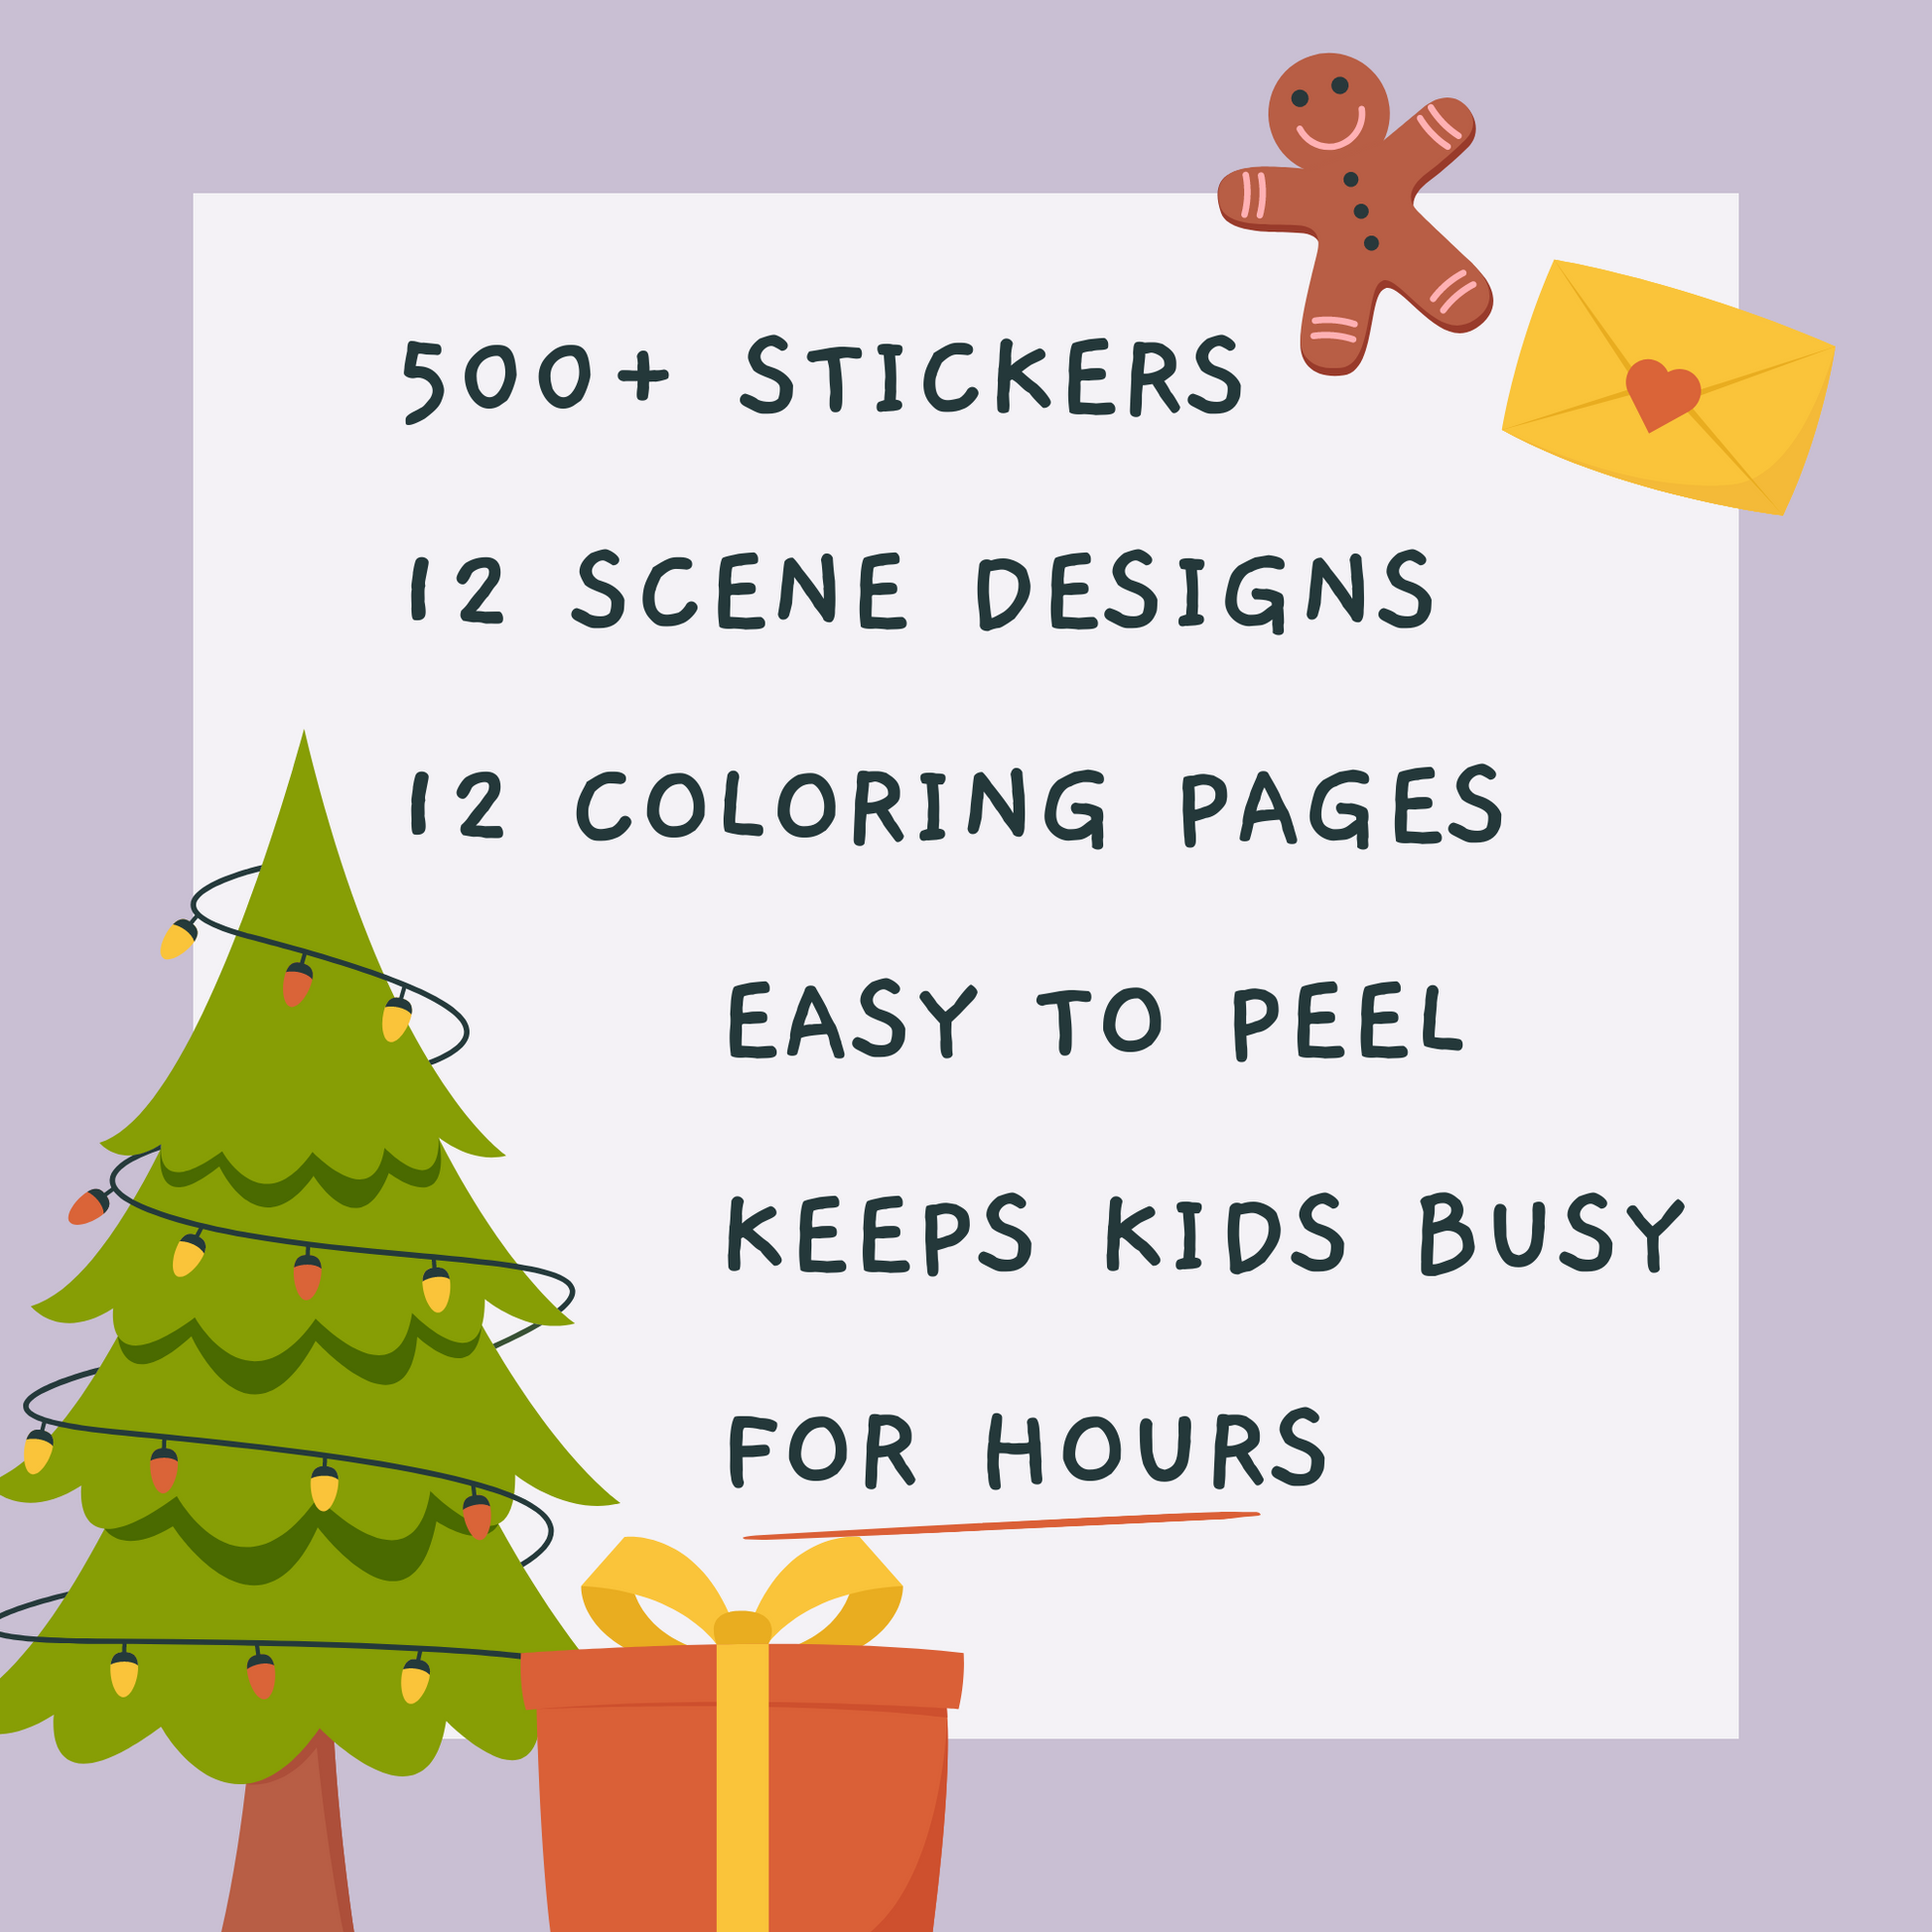 Winter Wonderland Stickers by Recollections™